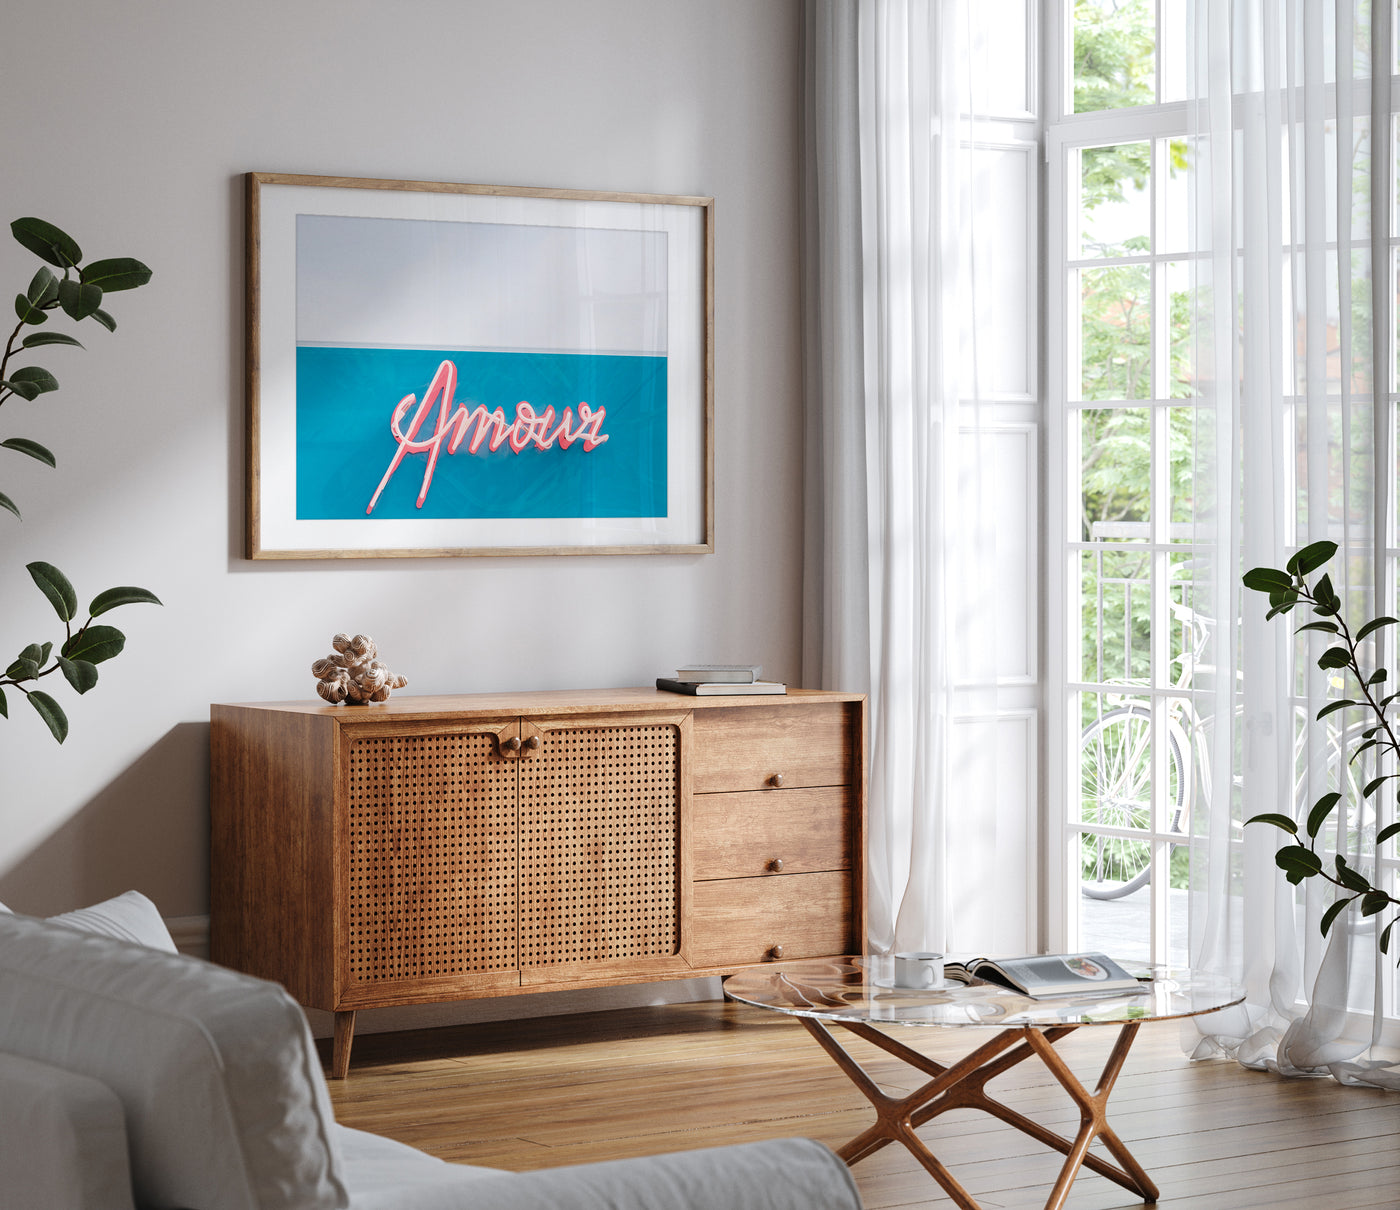 Amour print by Cattie Coyle Photography in living room